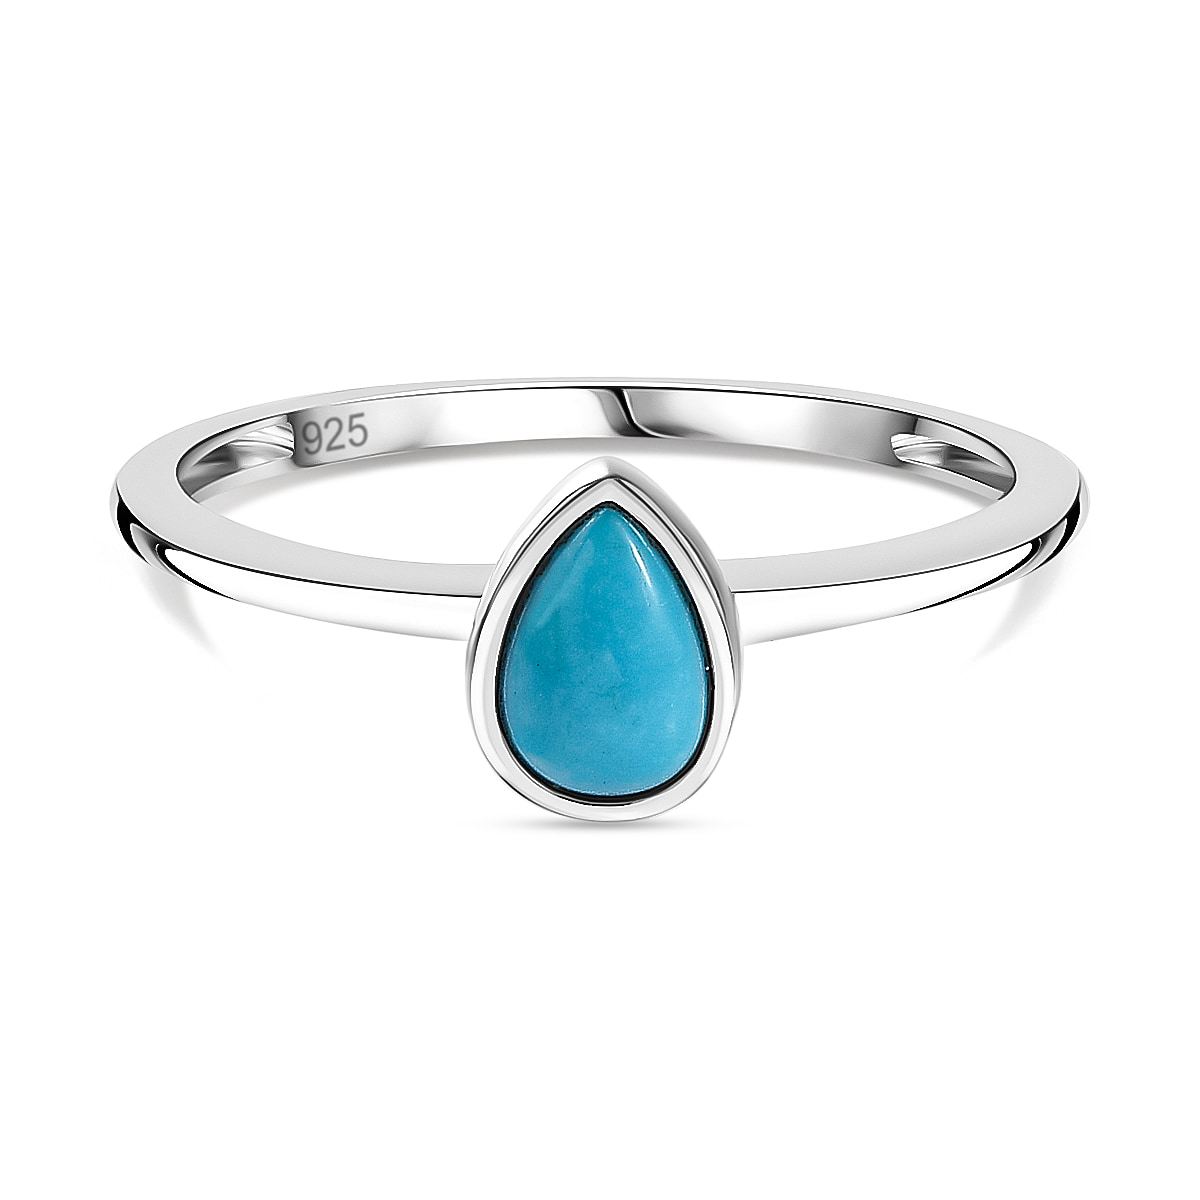 Arizona Sleeping Beauty Turquoise Solitaire Ring in Sterling Silver